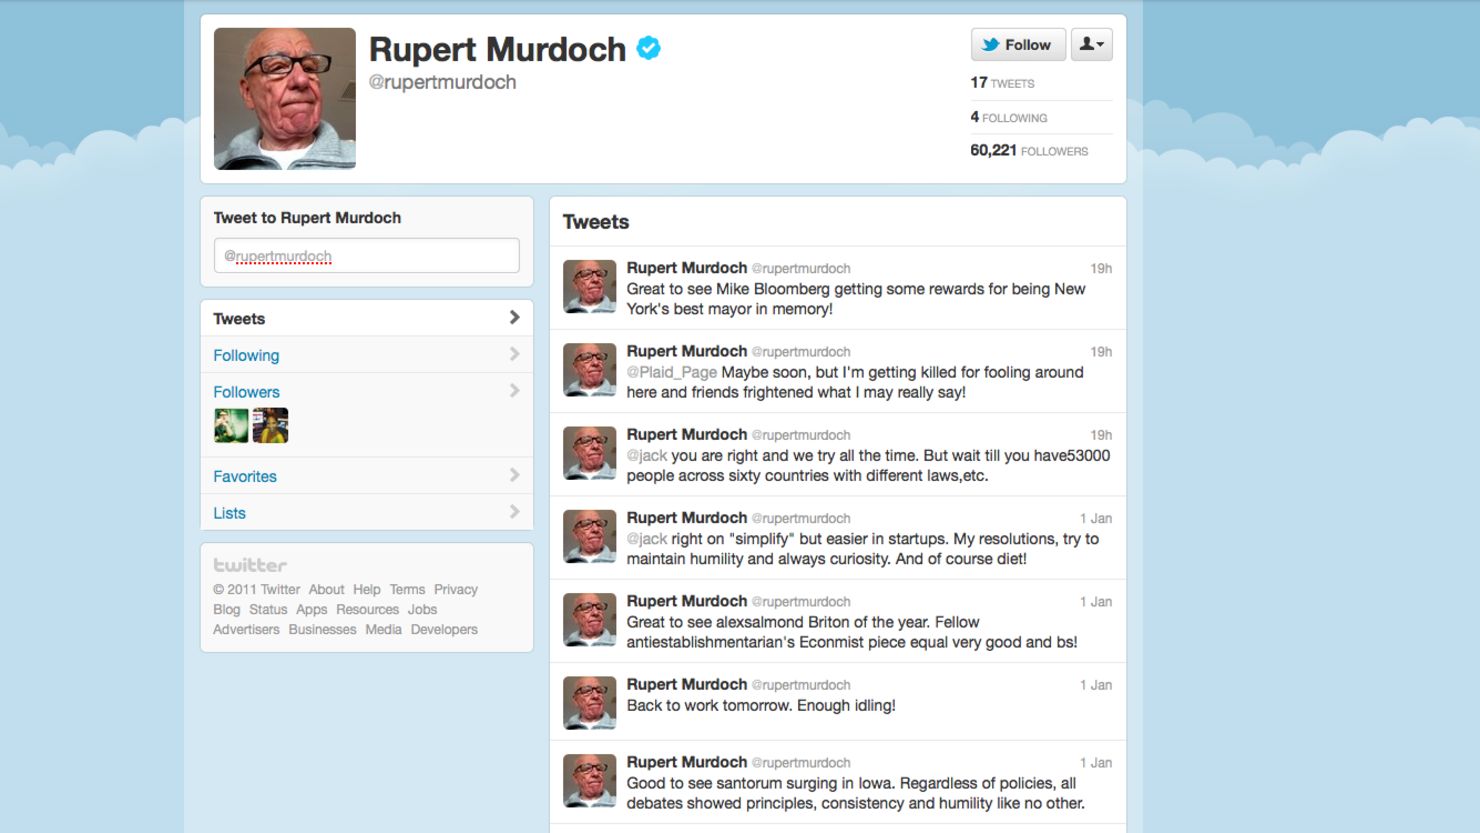 Media mogul Rupert Murdoch has followed four users since joining Twitter this weekend -- and one's a fake.